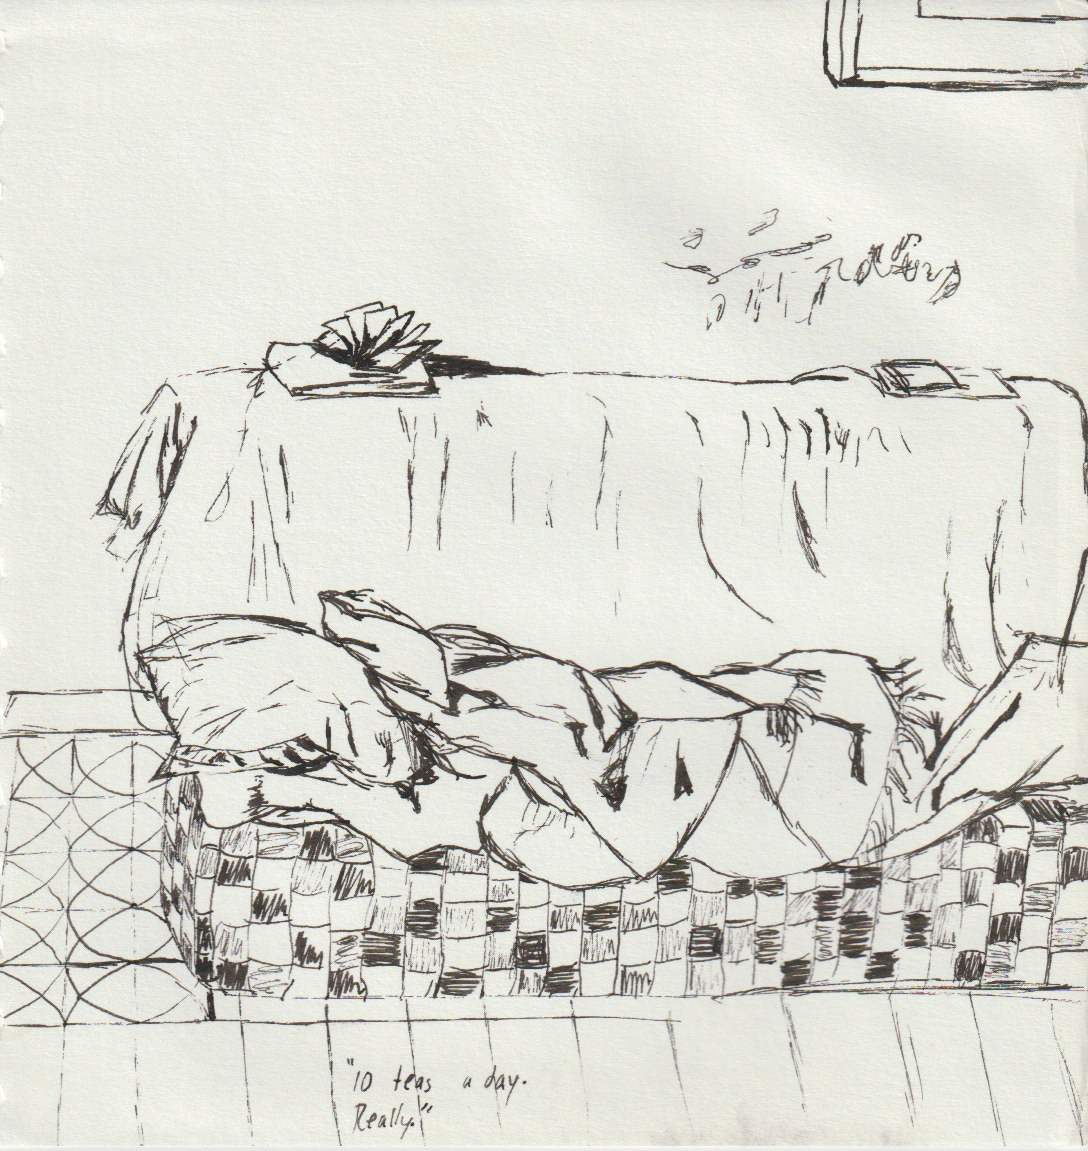 An ink sketch of a couch. On it are blankets, a pillow, some books. A tiny caption at the bottom says "10 teas a day. Really." 